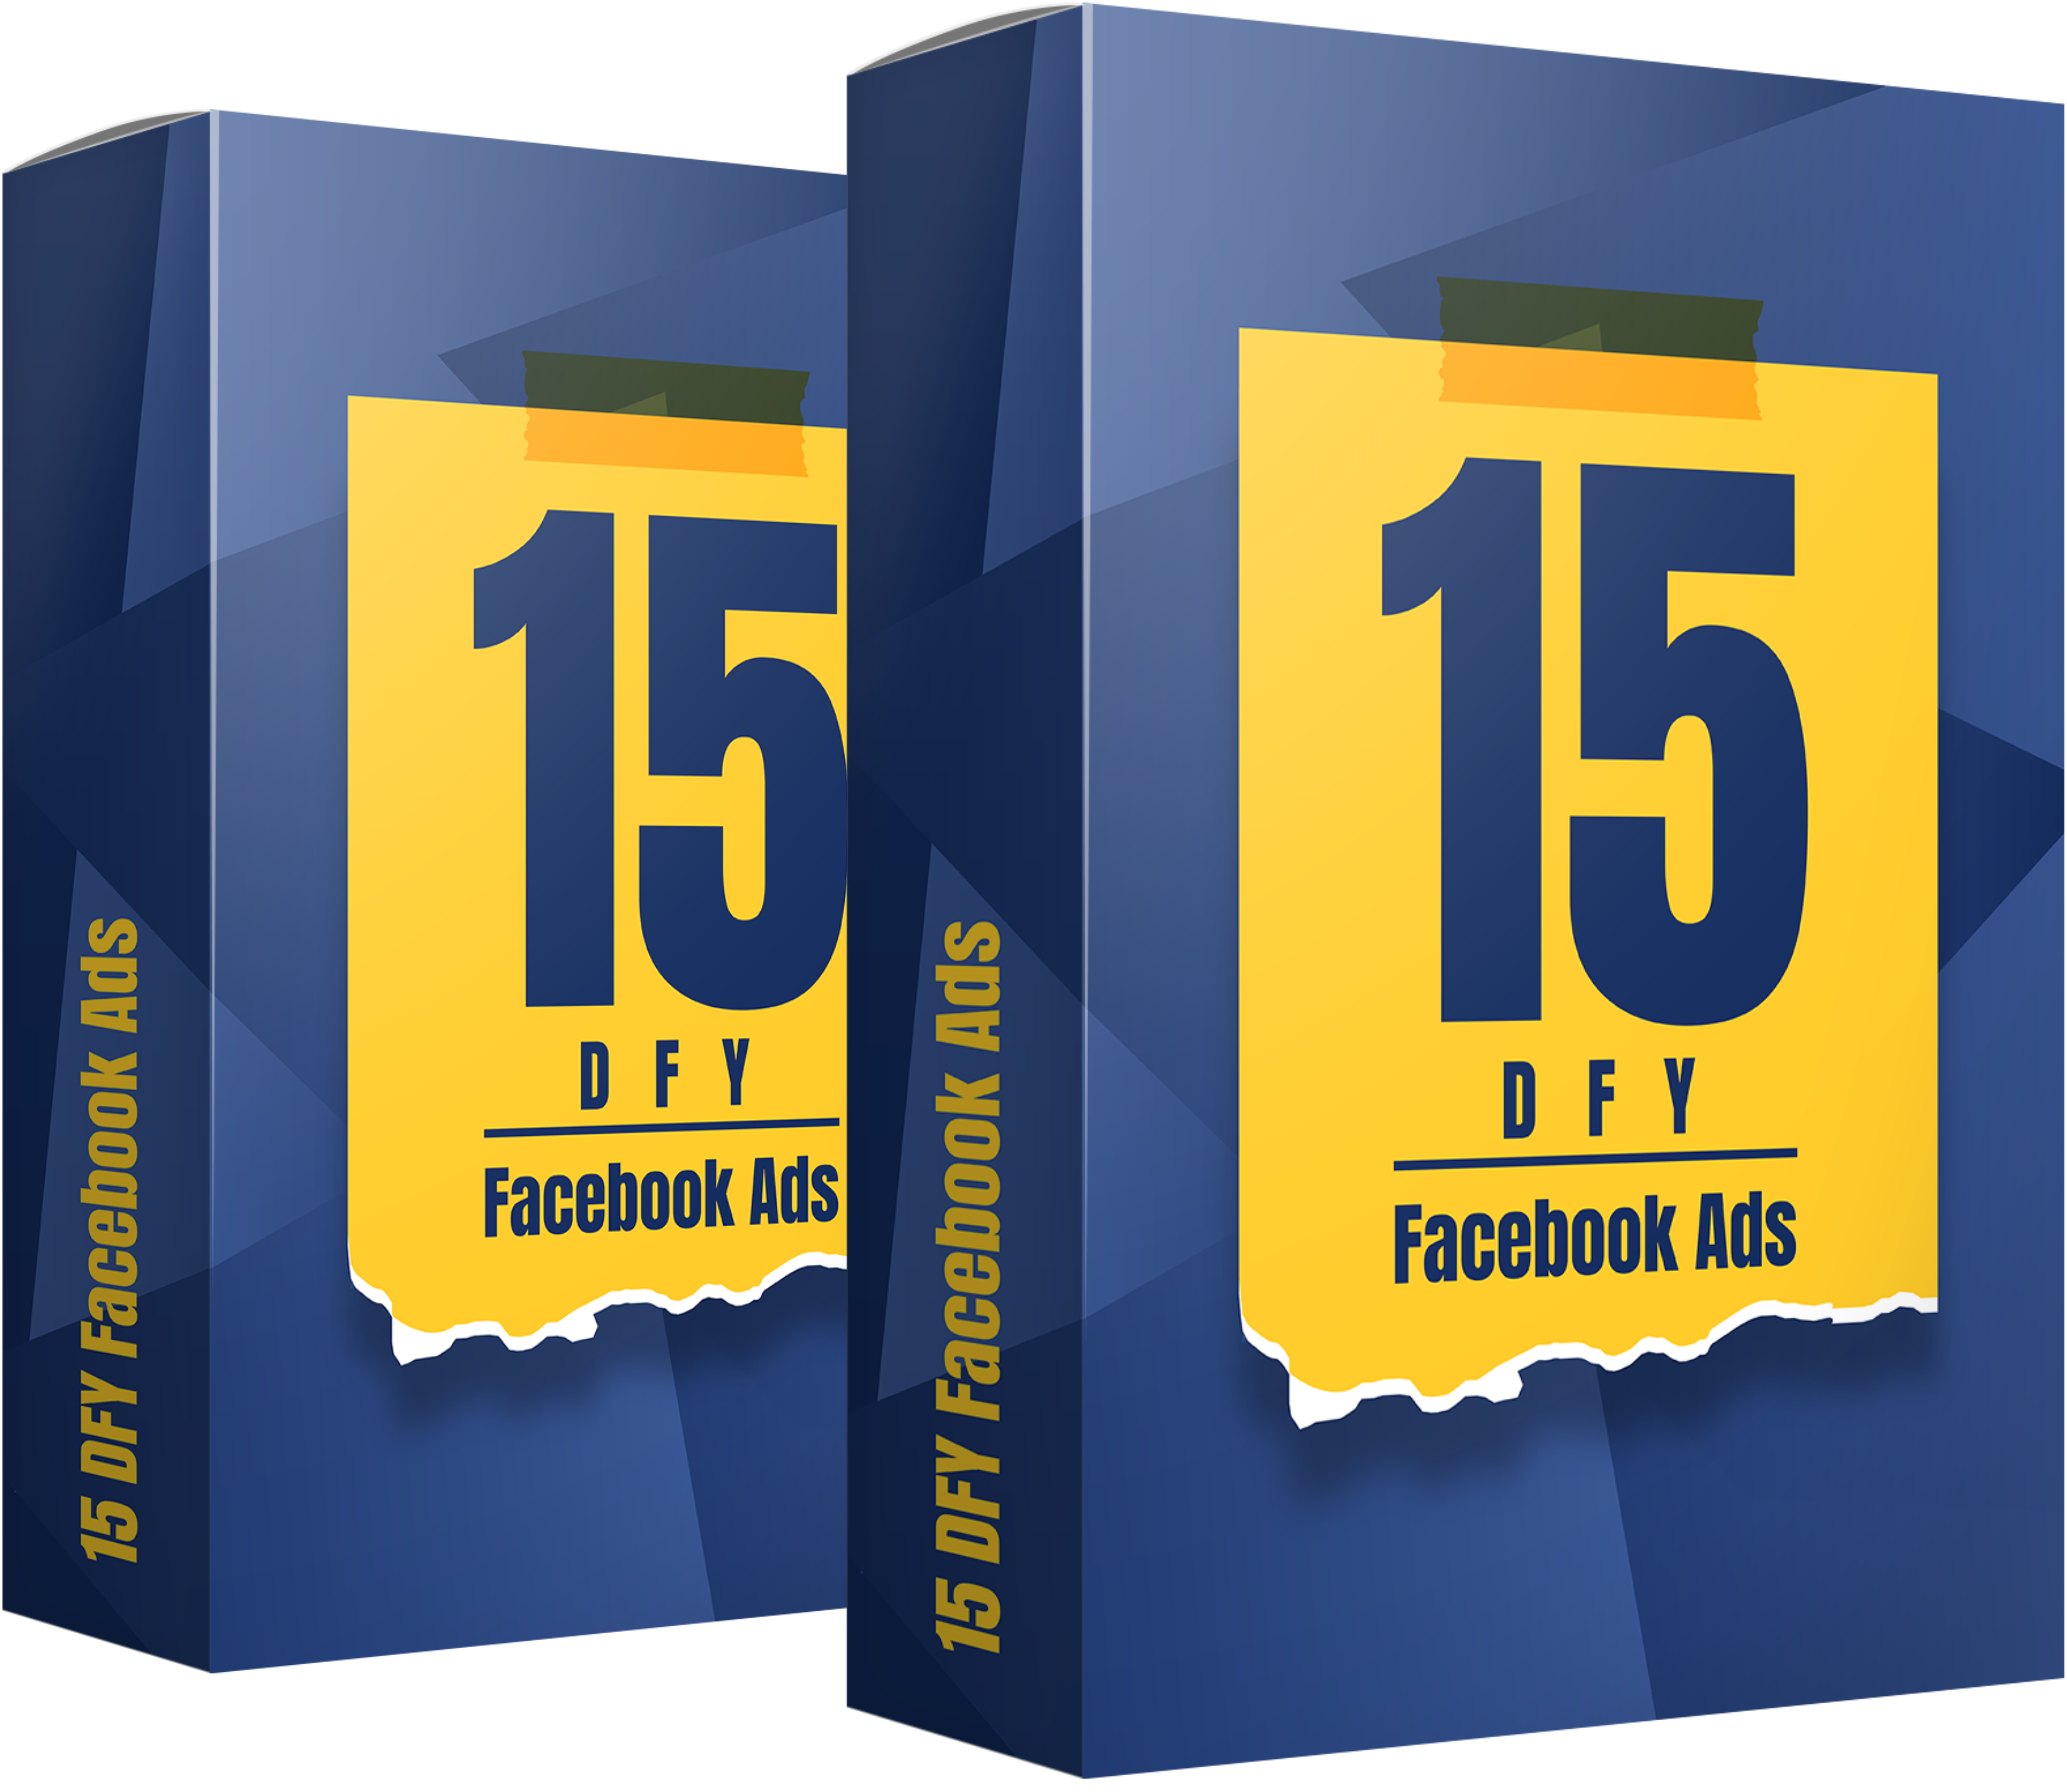 15%20DFY%20Facebook%20Ads Brand NEW Software Automates Getting 1000's of Facebook and Instagram Followers Easily